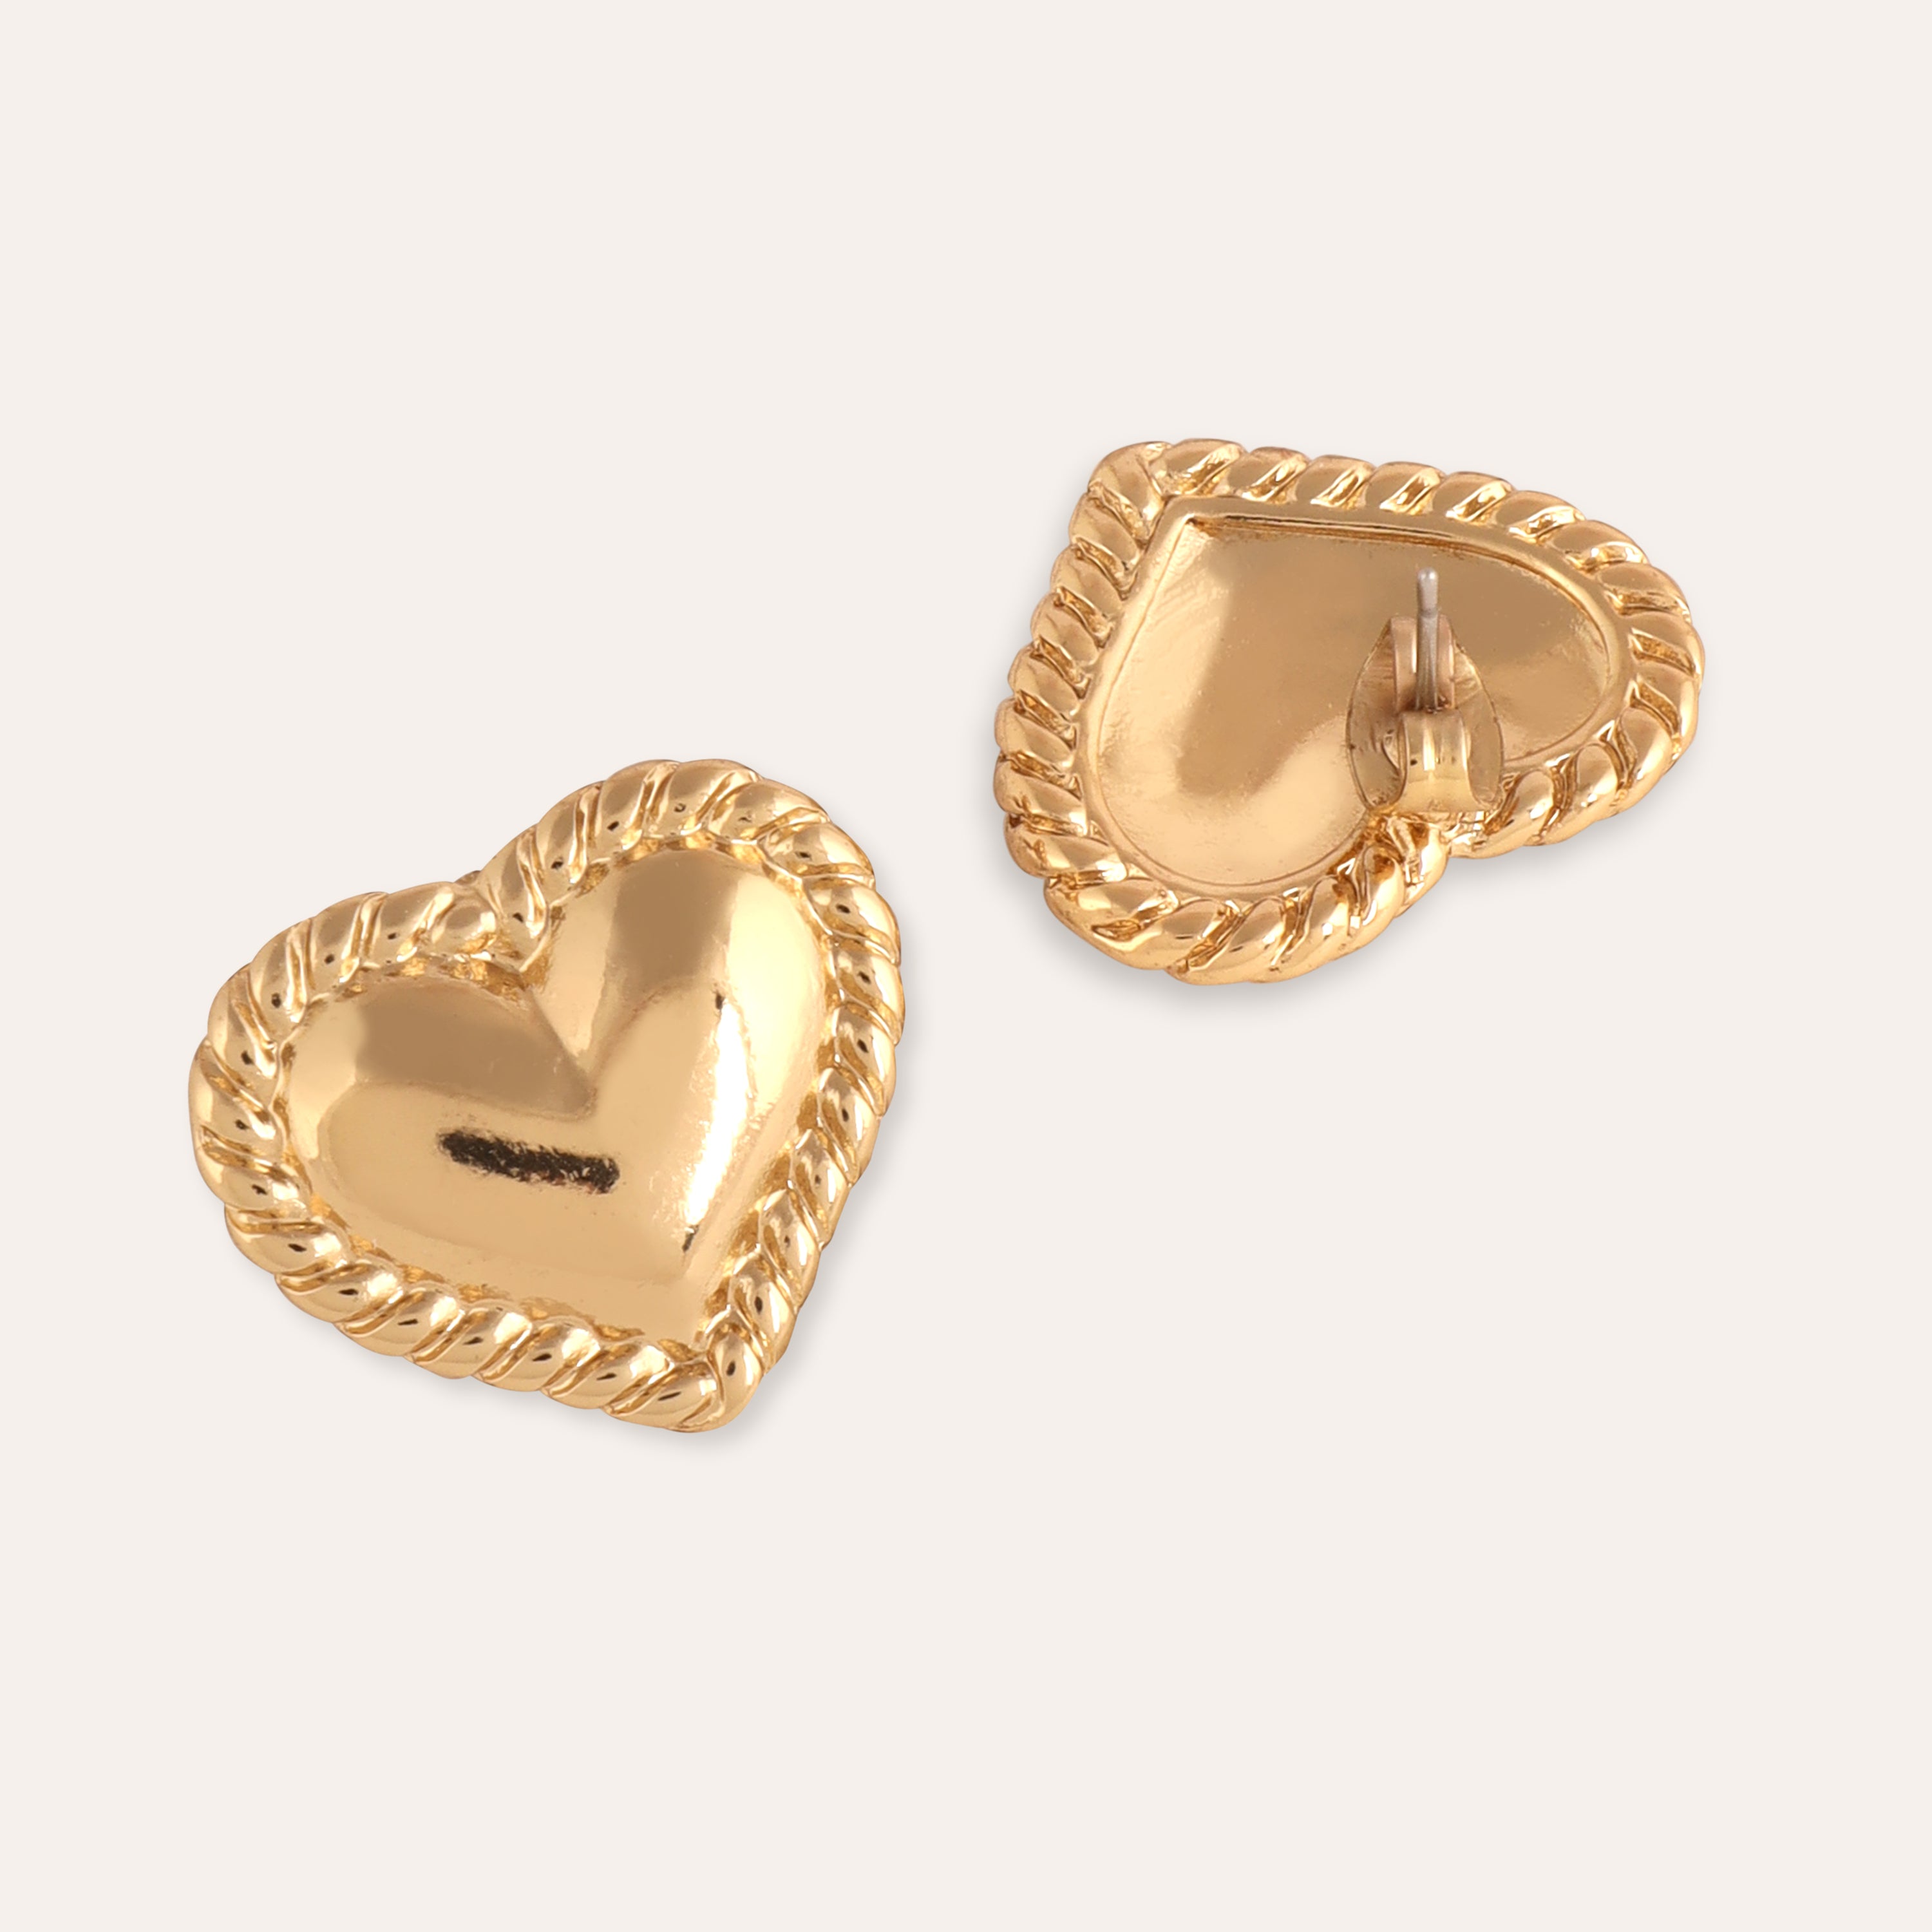 TFC Heartfelt Gold Plated Stud Earrings- Discover daily wear gold earrings including stud earrings, hoop earrings, and pearl earrings, perfect as earrings for women and earrings for girls.Find the cheapest fashion jewellery which is anti-tarnis​h only at The Fun company.